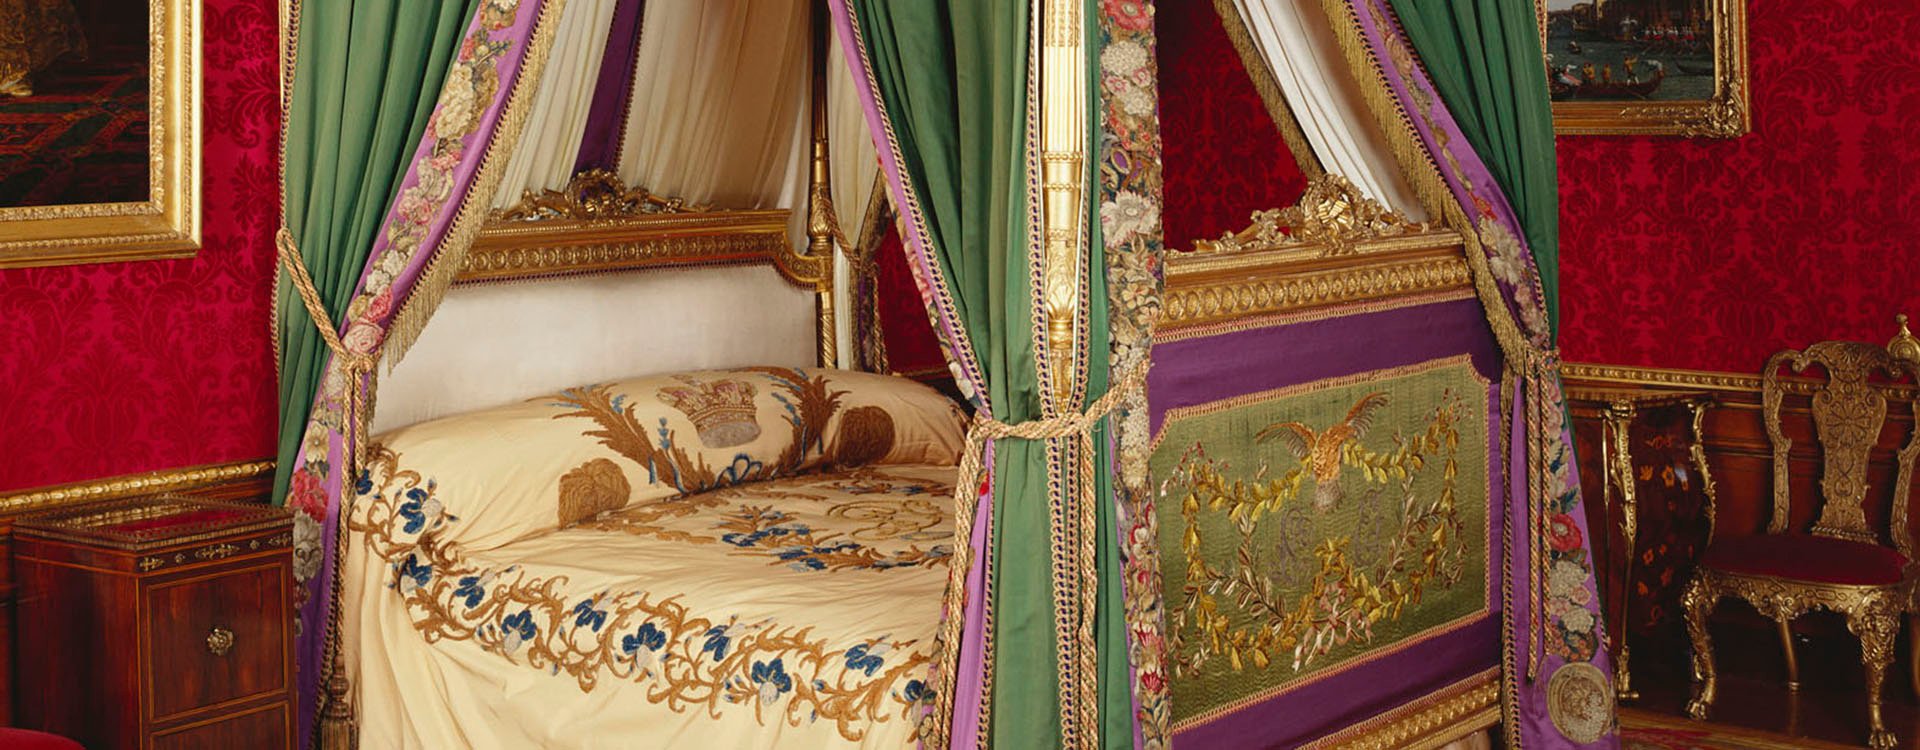 George IV's bed